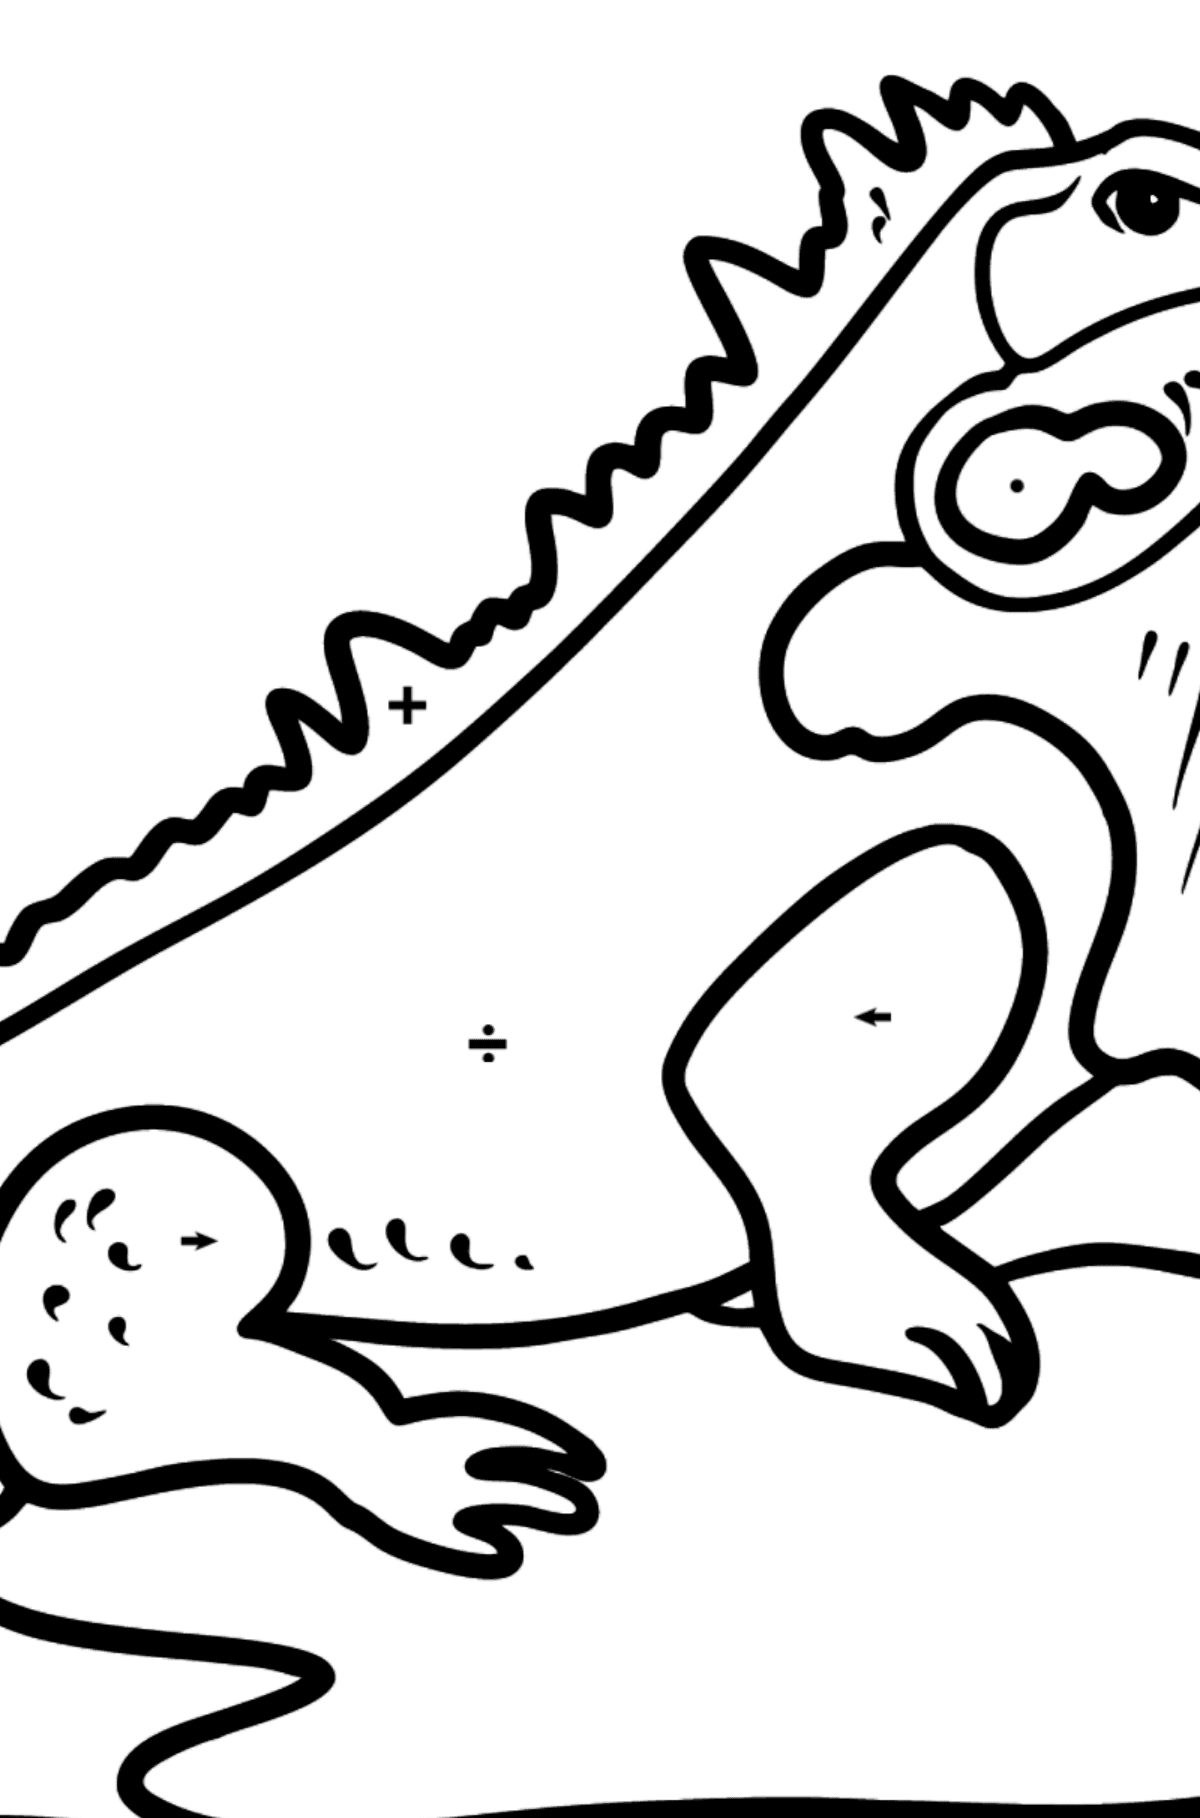 Portuguese Letter I coloring pages - IGUANA - Coloring by Symbols for Kids